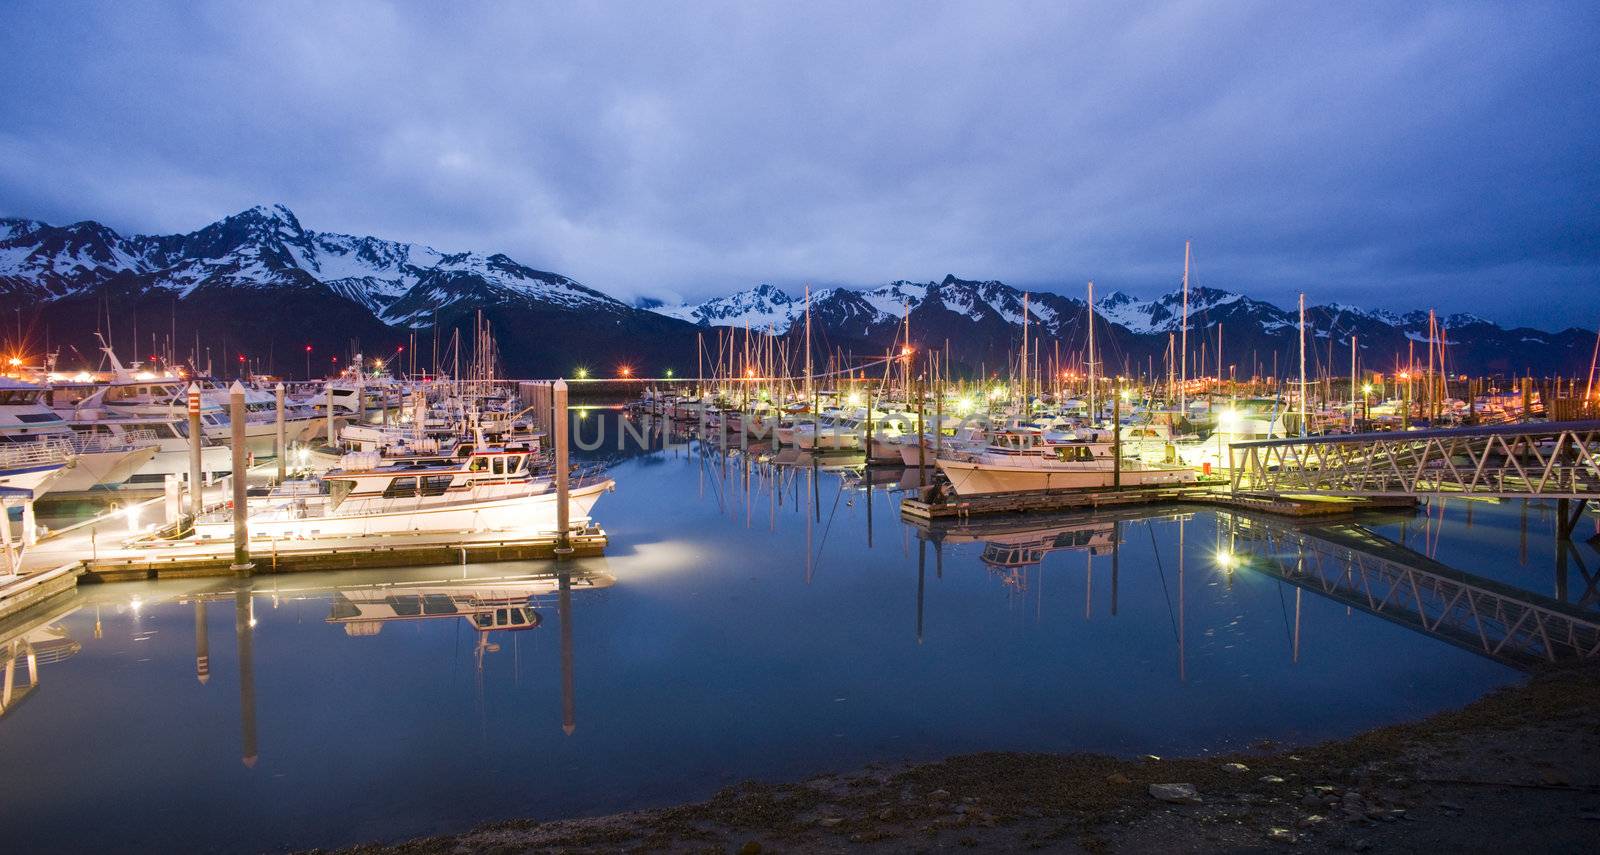 Seward marina in the middle of the night